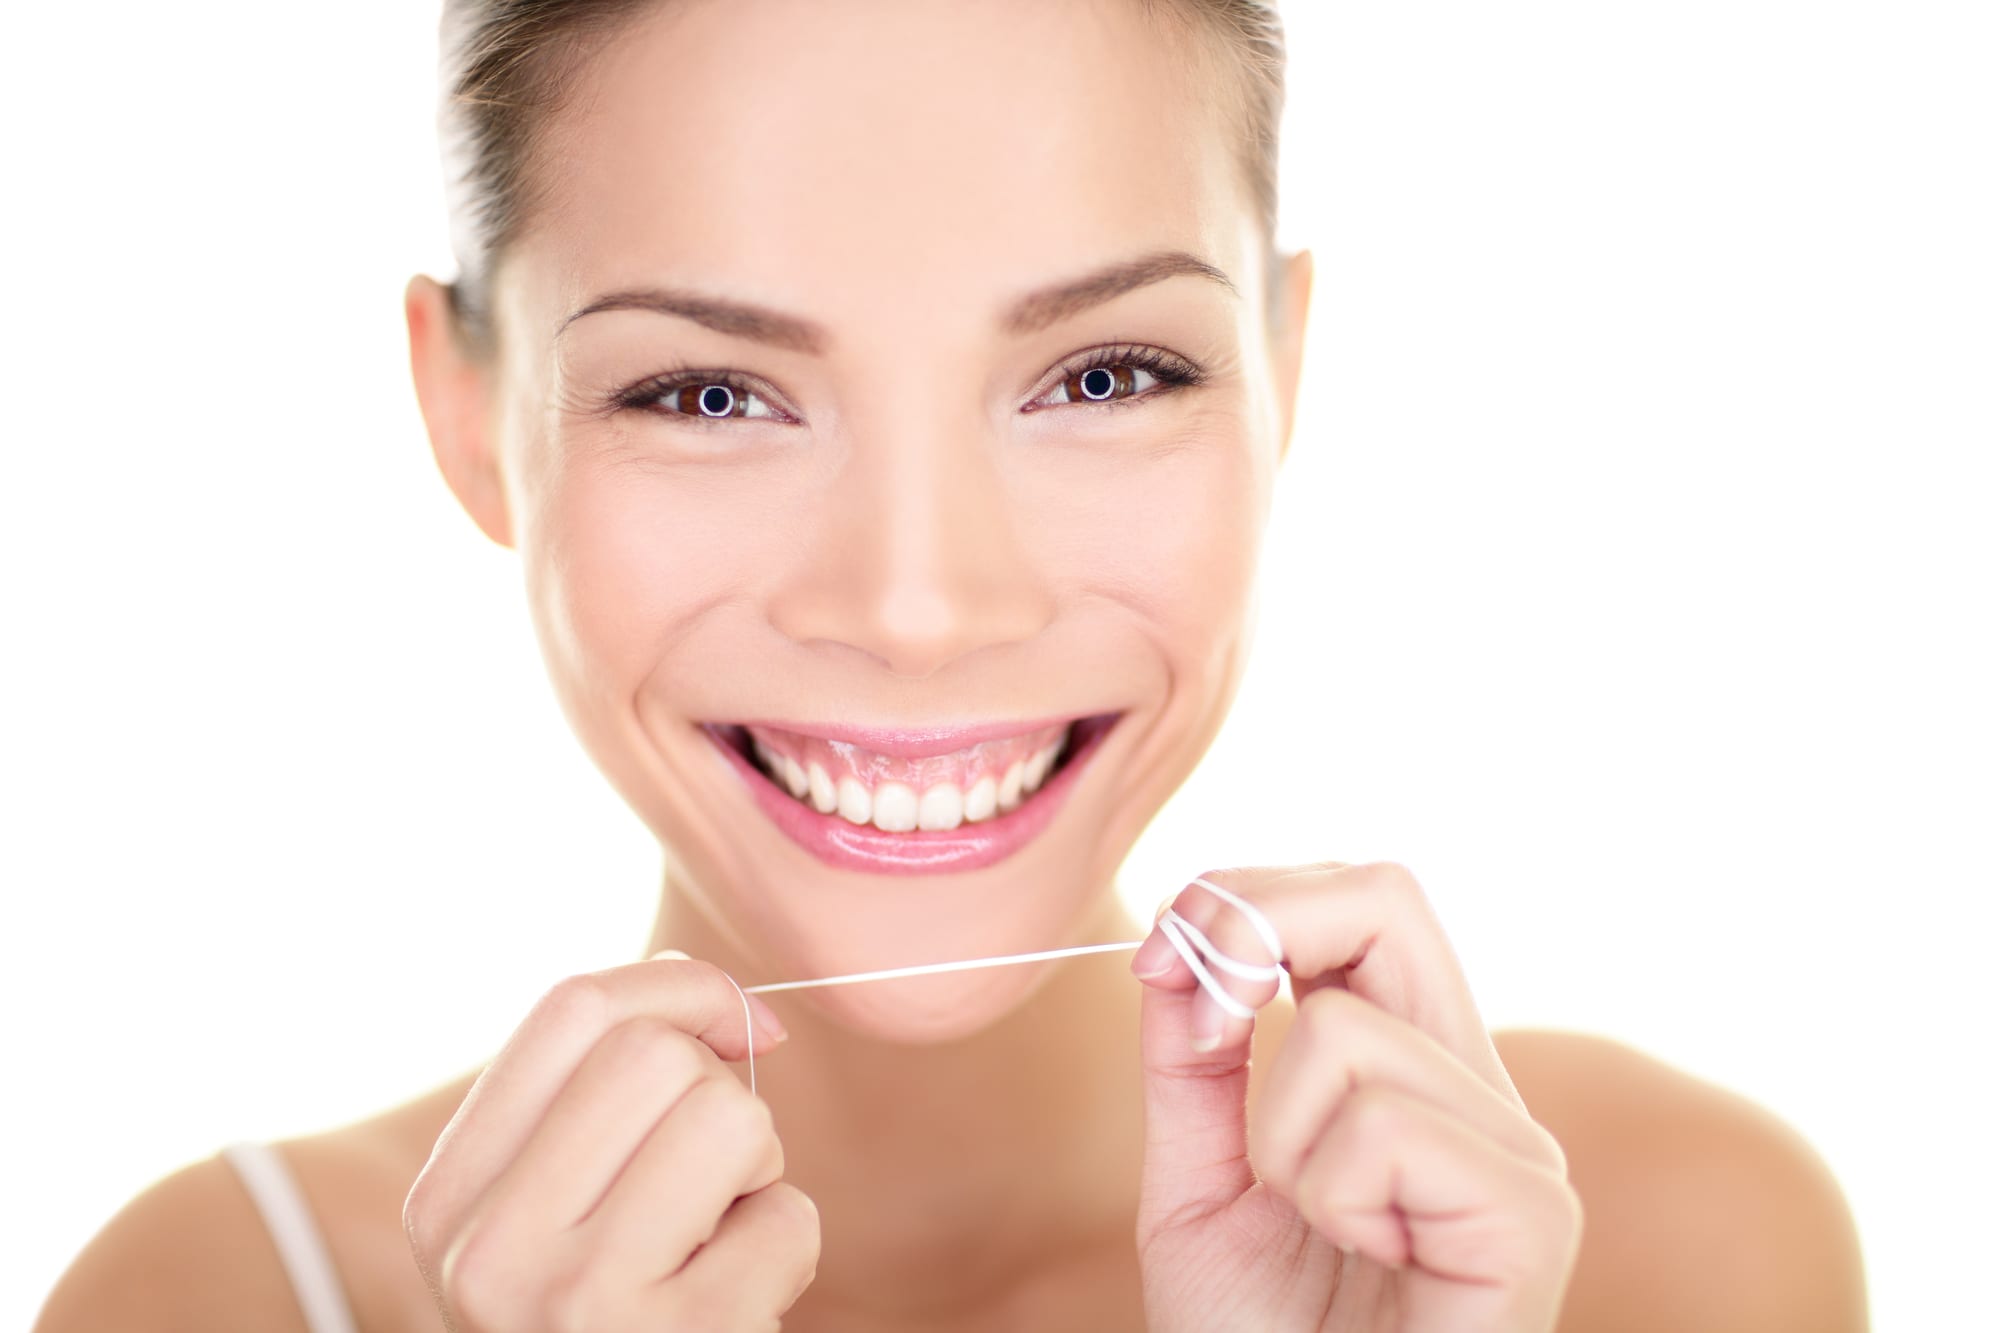 Periodontal care at Smiles on Randolph